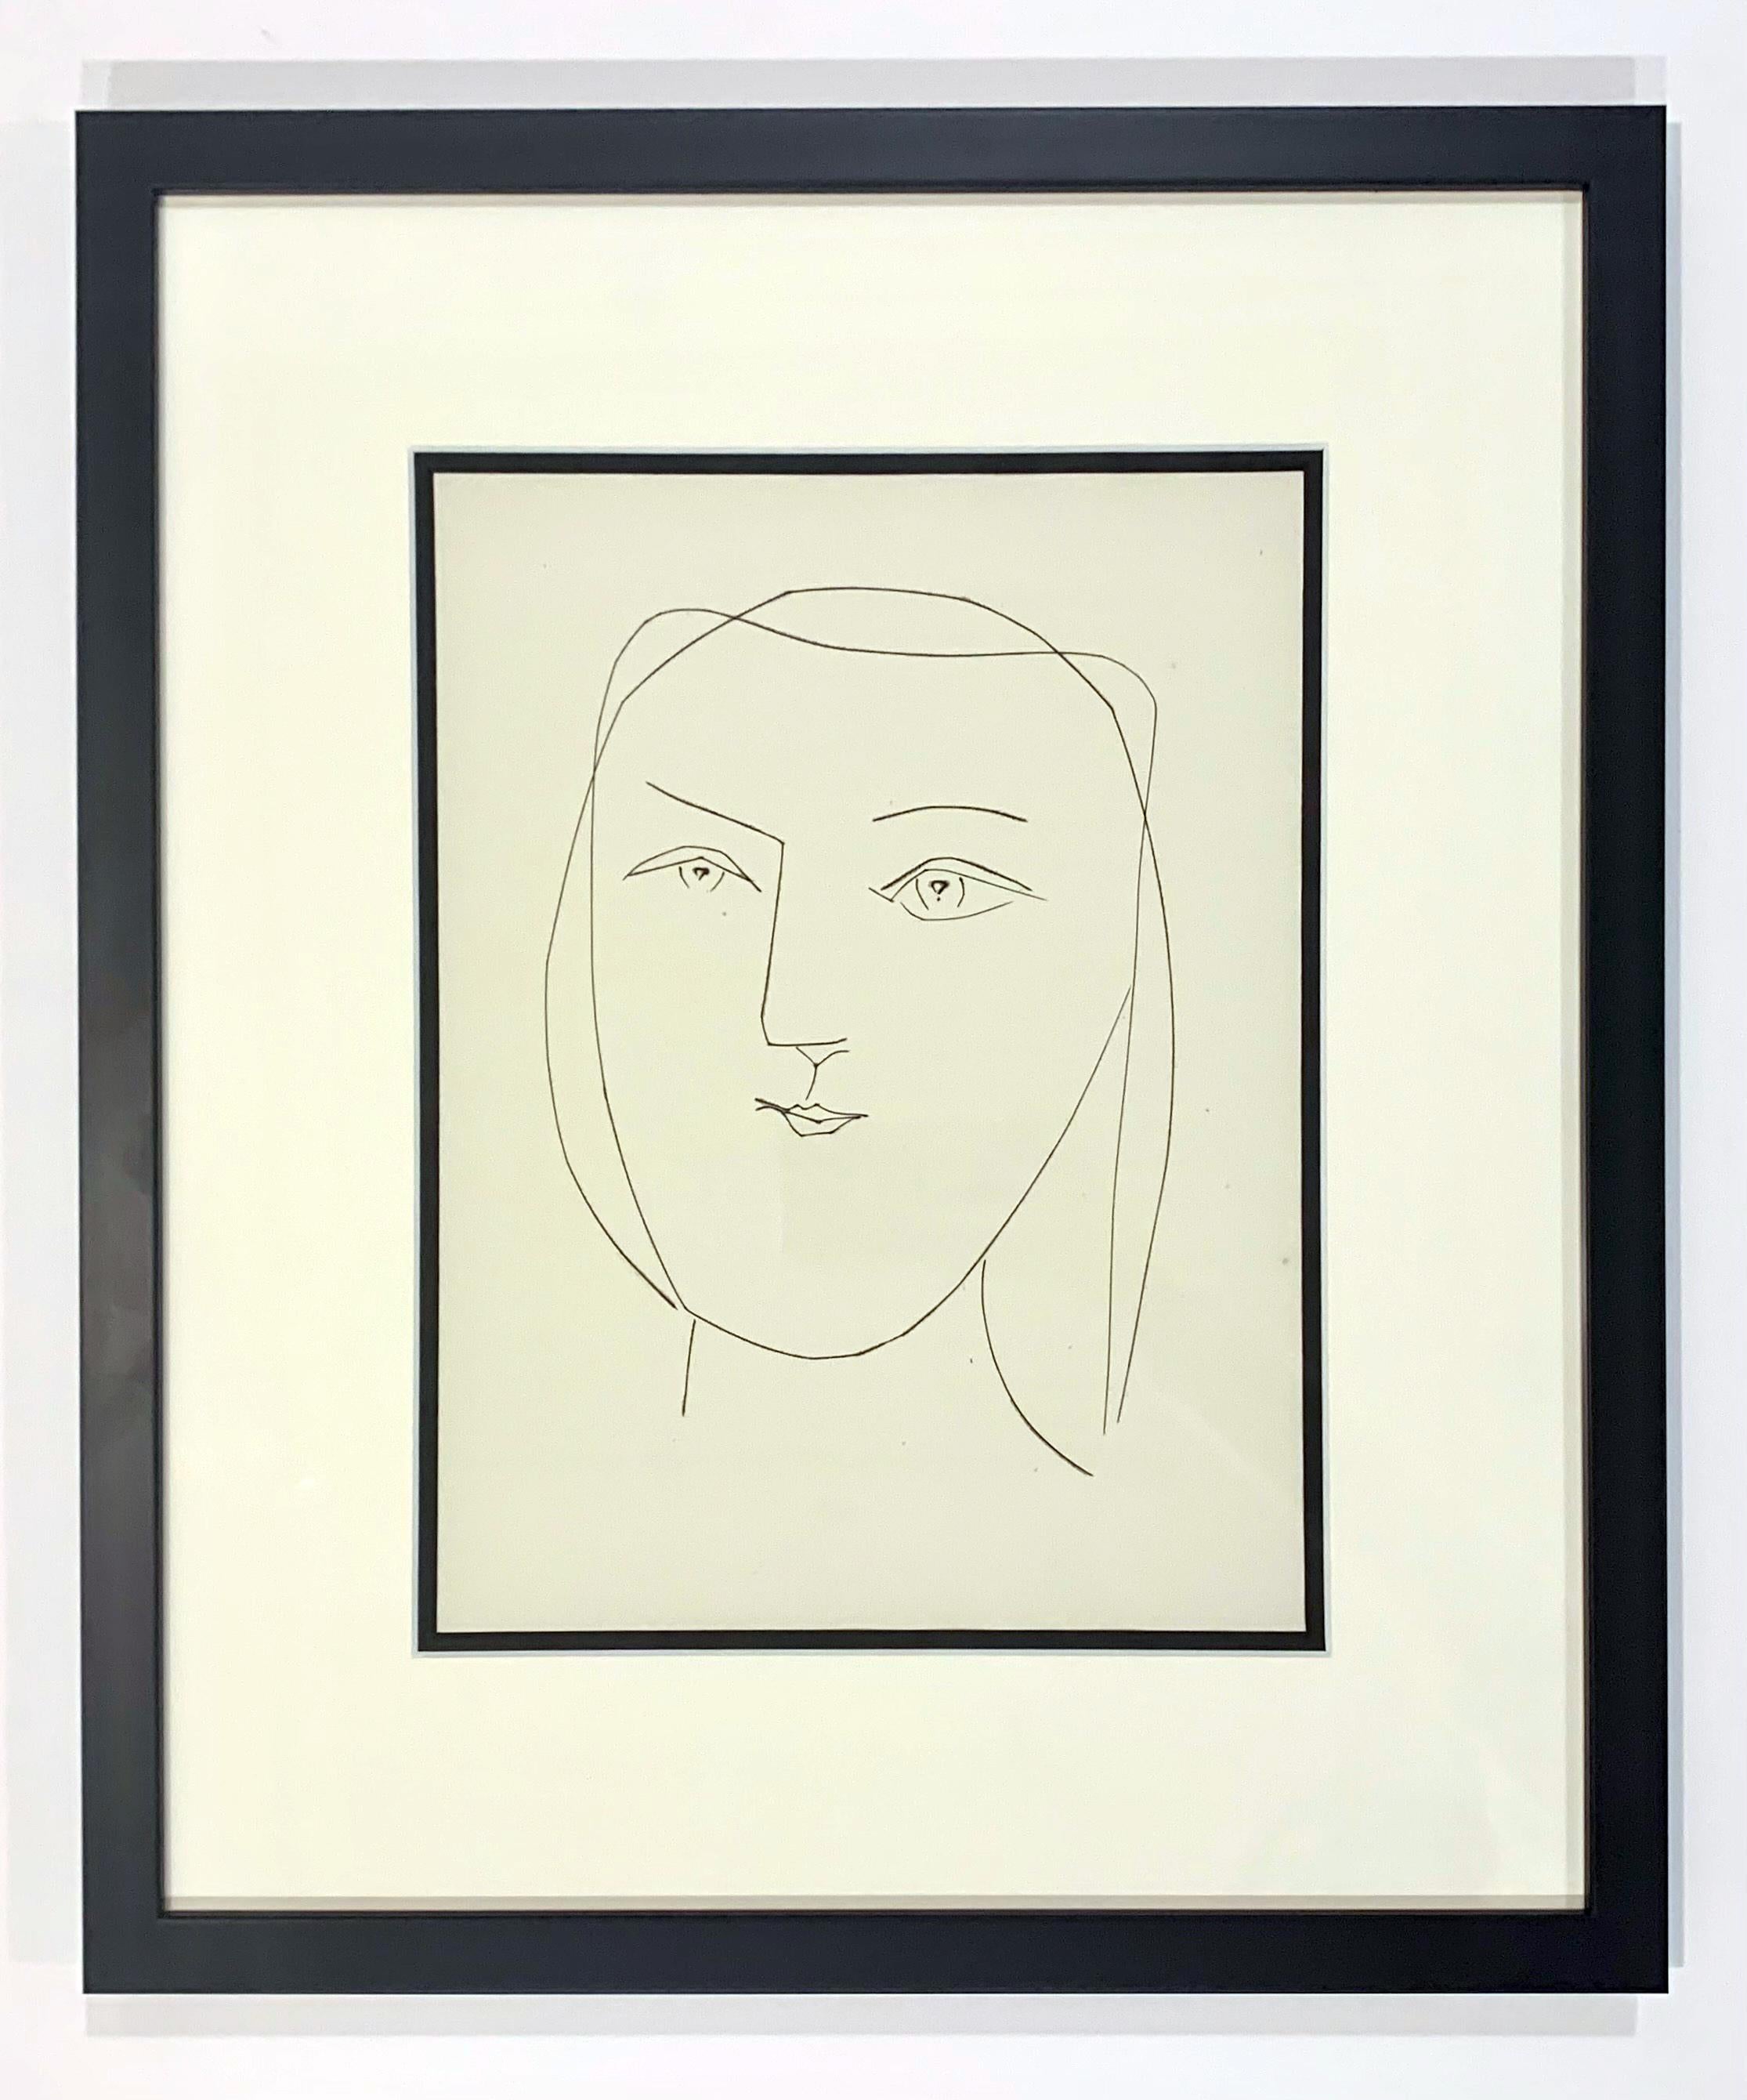 Pablo Picasso Portrait Print - Carmen, Oval Head of a Woman with Piercing Eyes (Plate XXI)